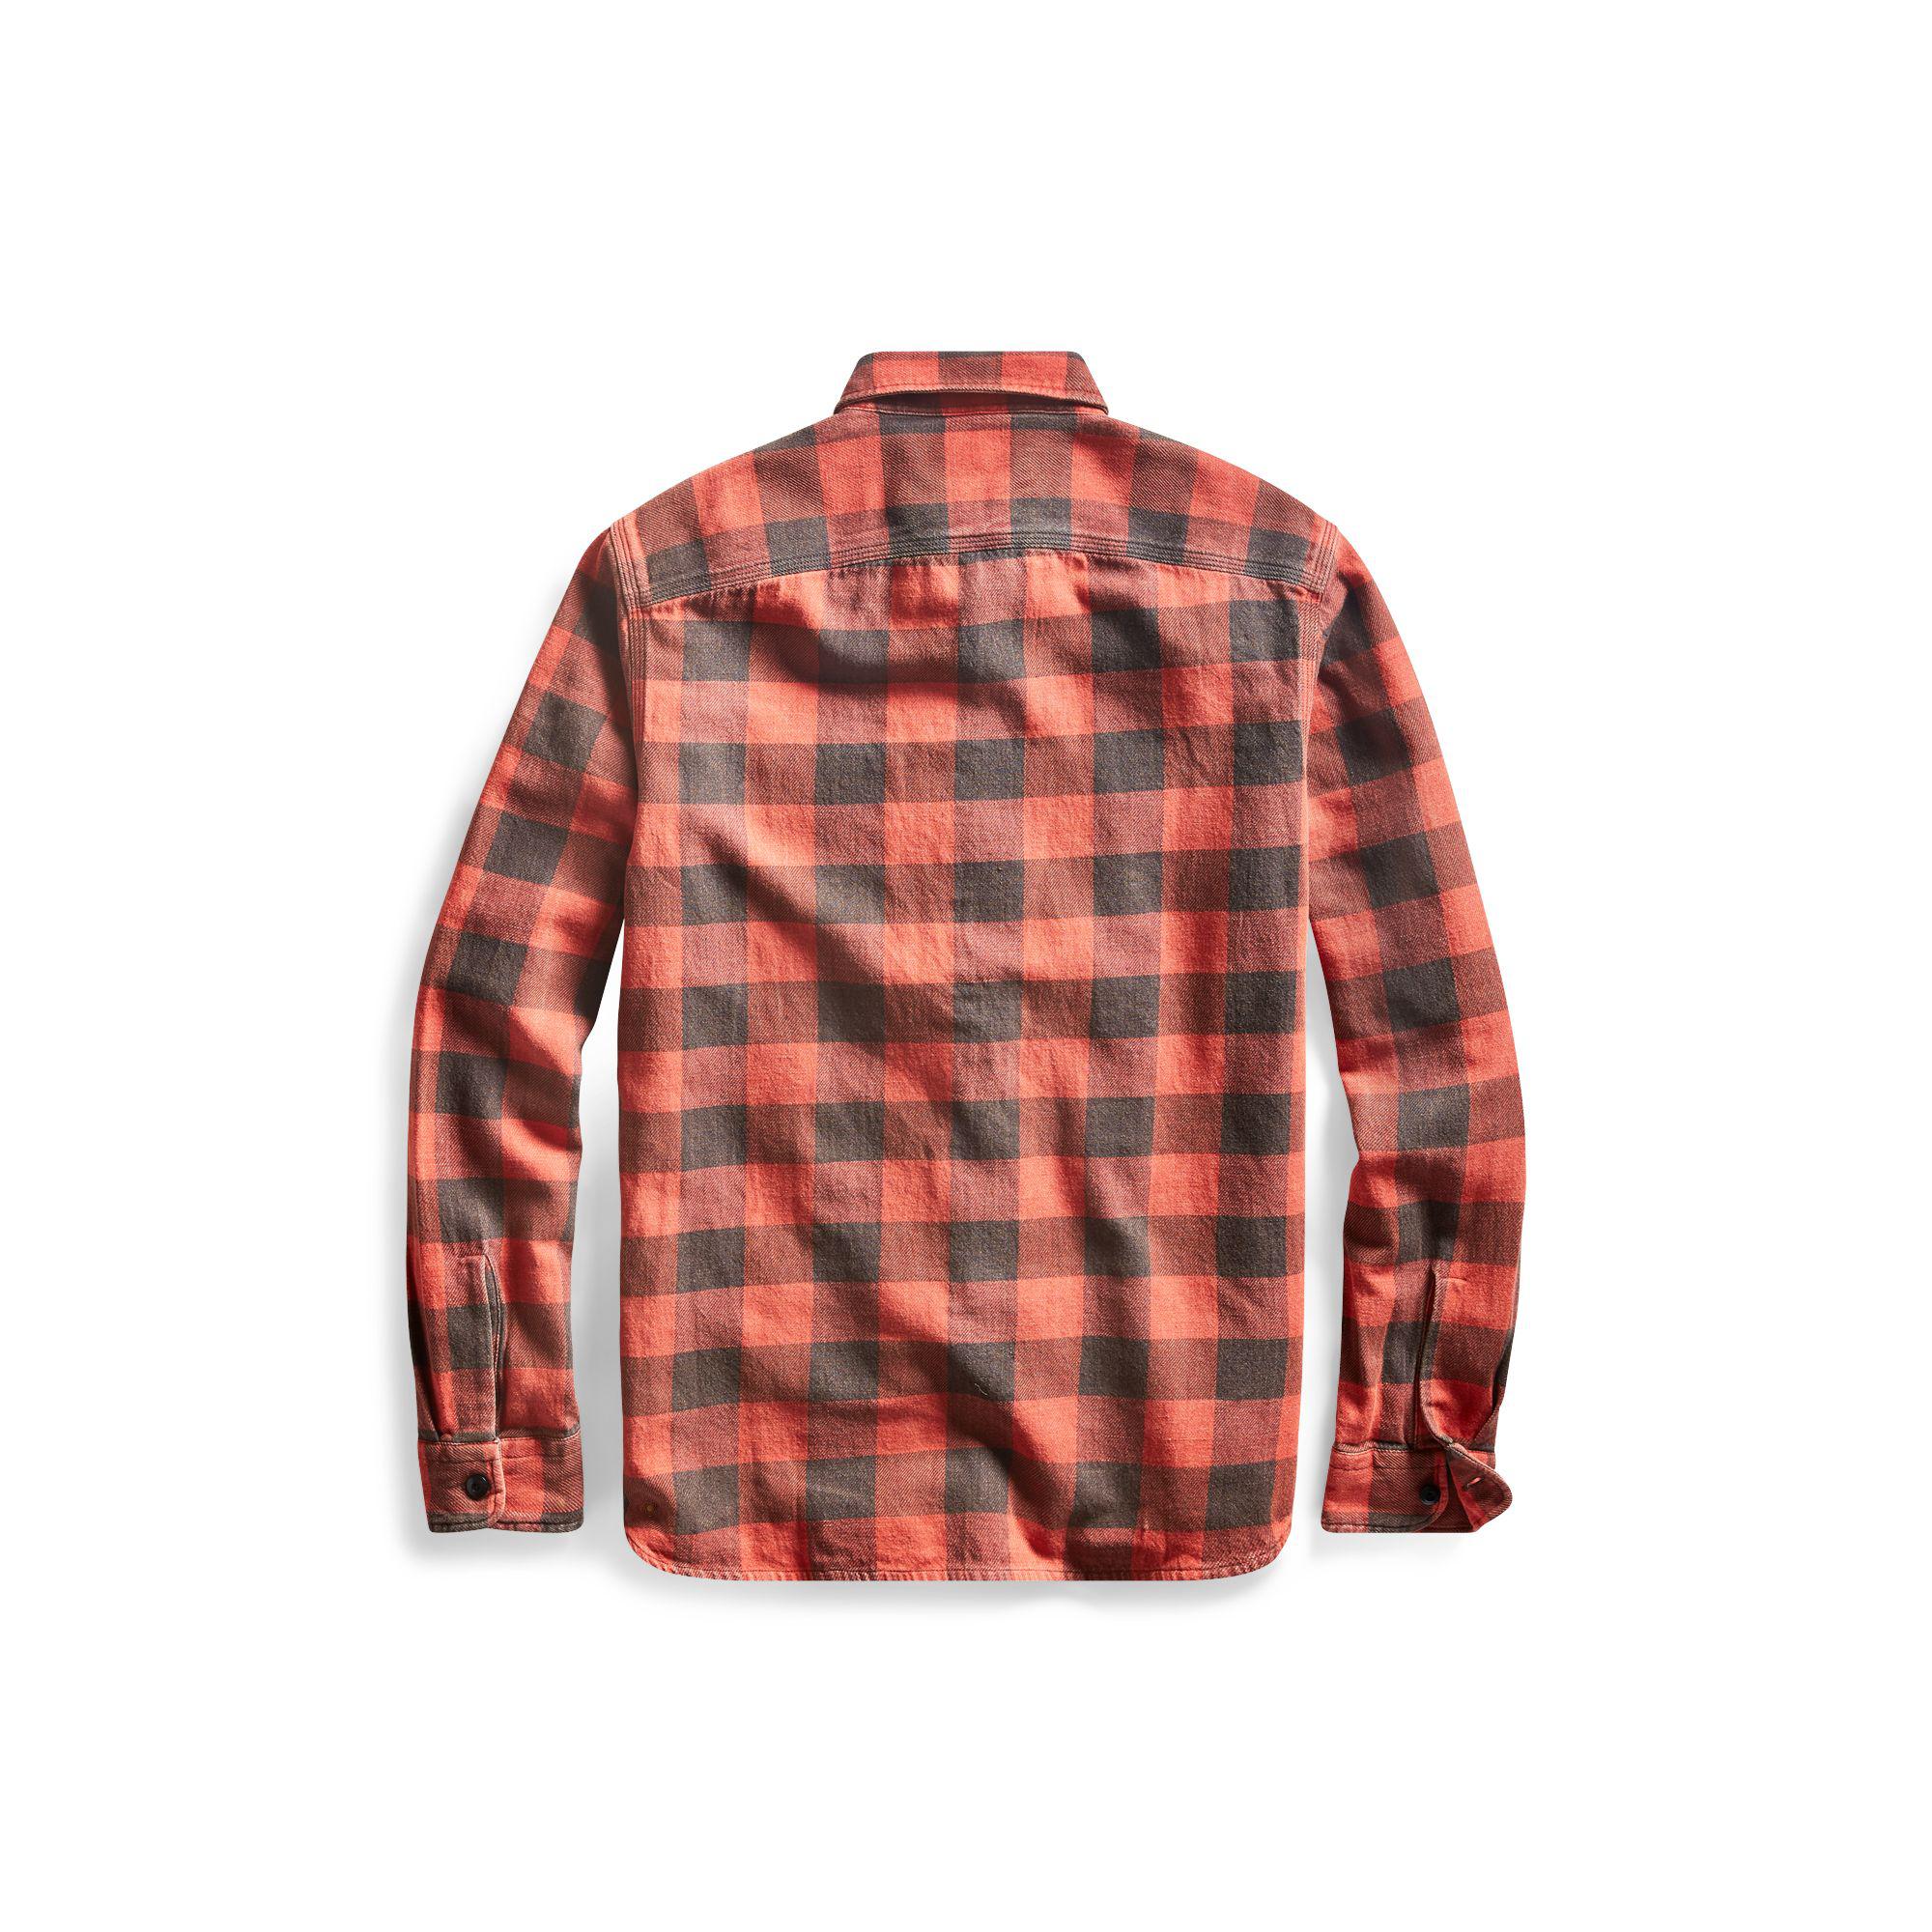 RRL Cotton Matlock Plaid Twill Workshirt in Red for Men - Lyst